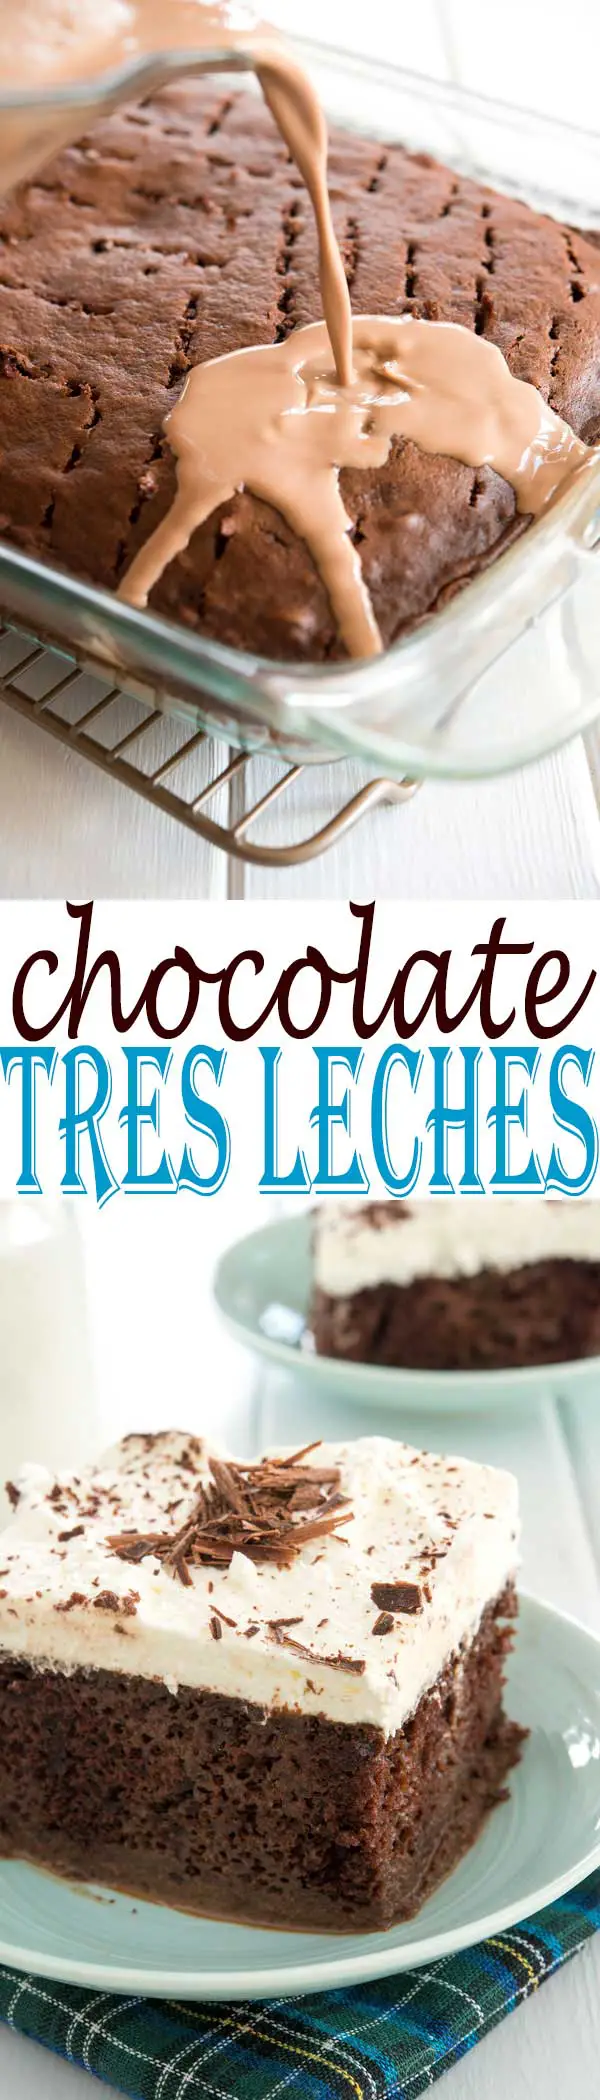 Easy chocolate tres leches cake recipe with condensed milk. Your friends will LOVE this dessert...it's the best! #mexican #dessert #holidays